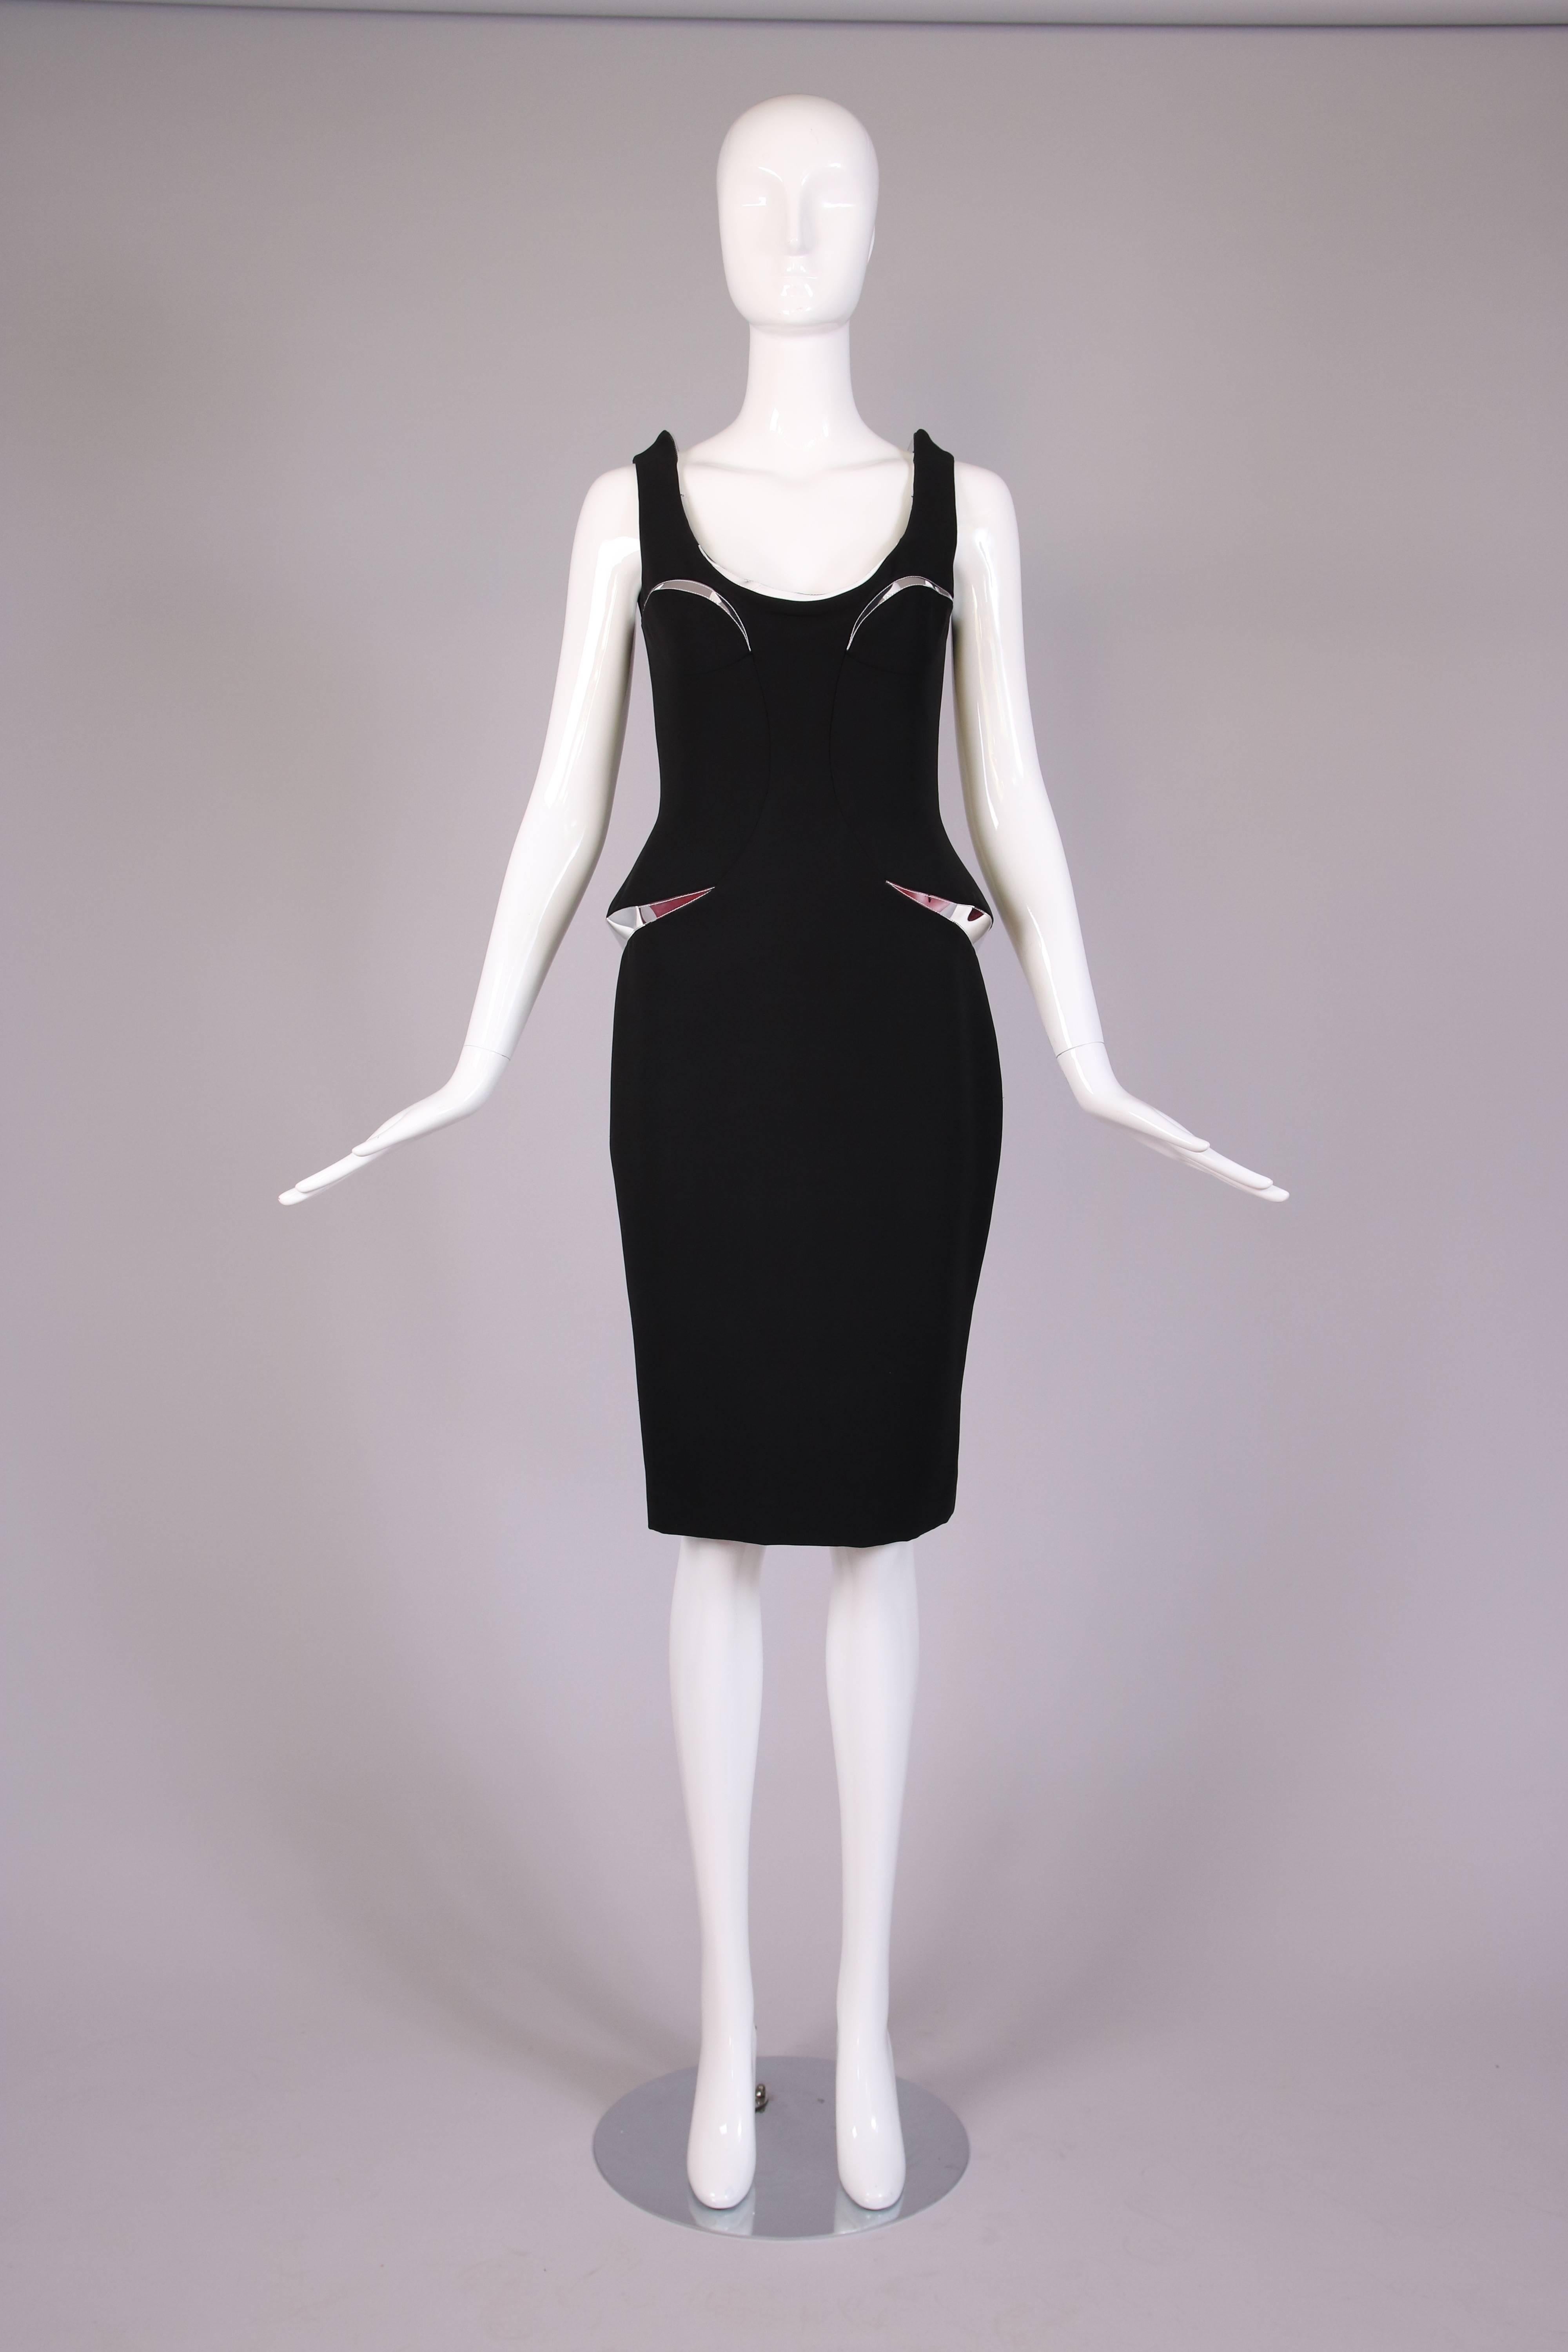 Versace Bodycon Black Mini Dress w/Silver Insets - New With Tags In Excellent Condition For Sale In Studio City, CA